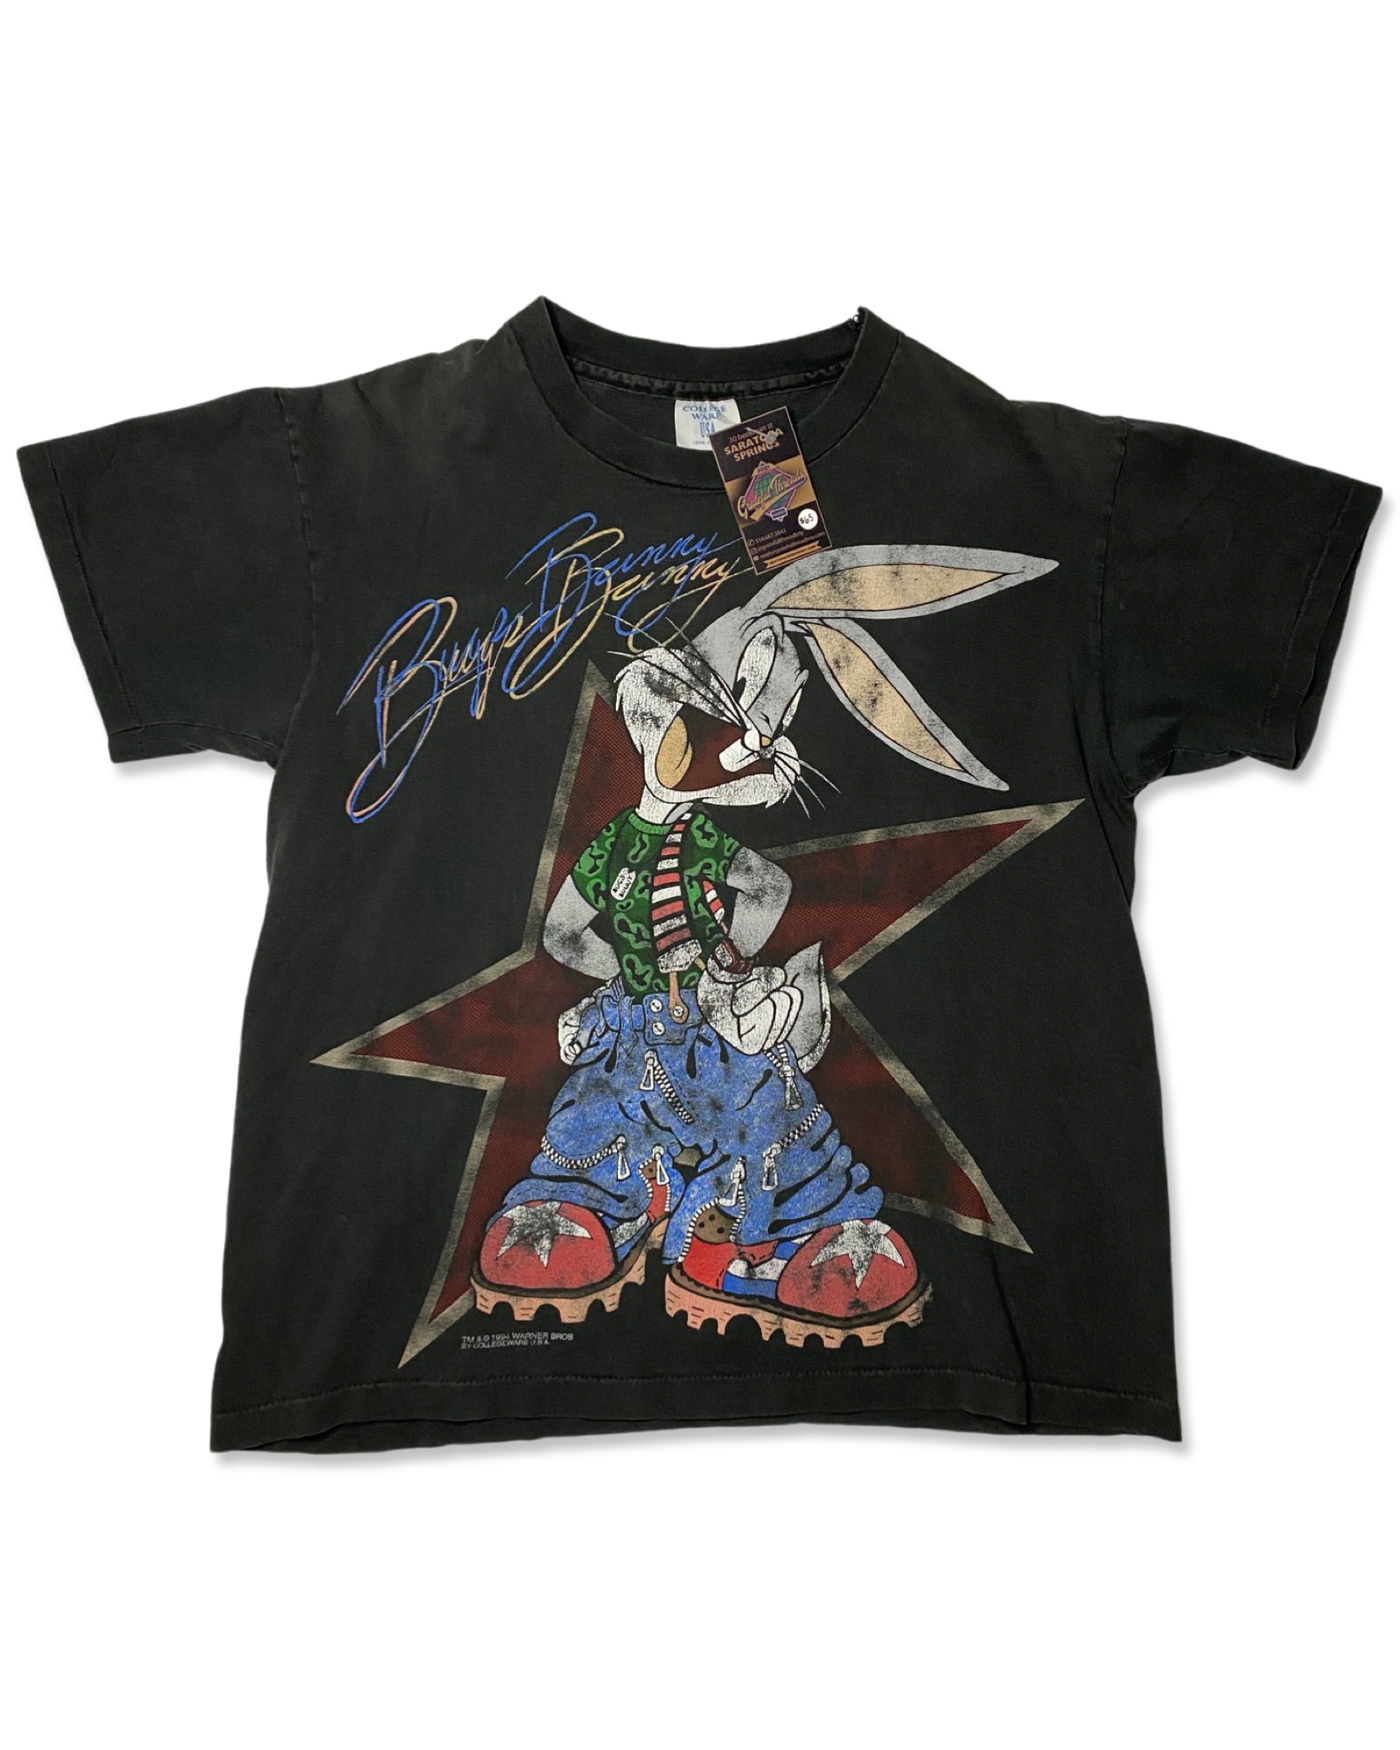 Vintage 1994 Bugs Bully T-Shirt